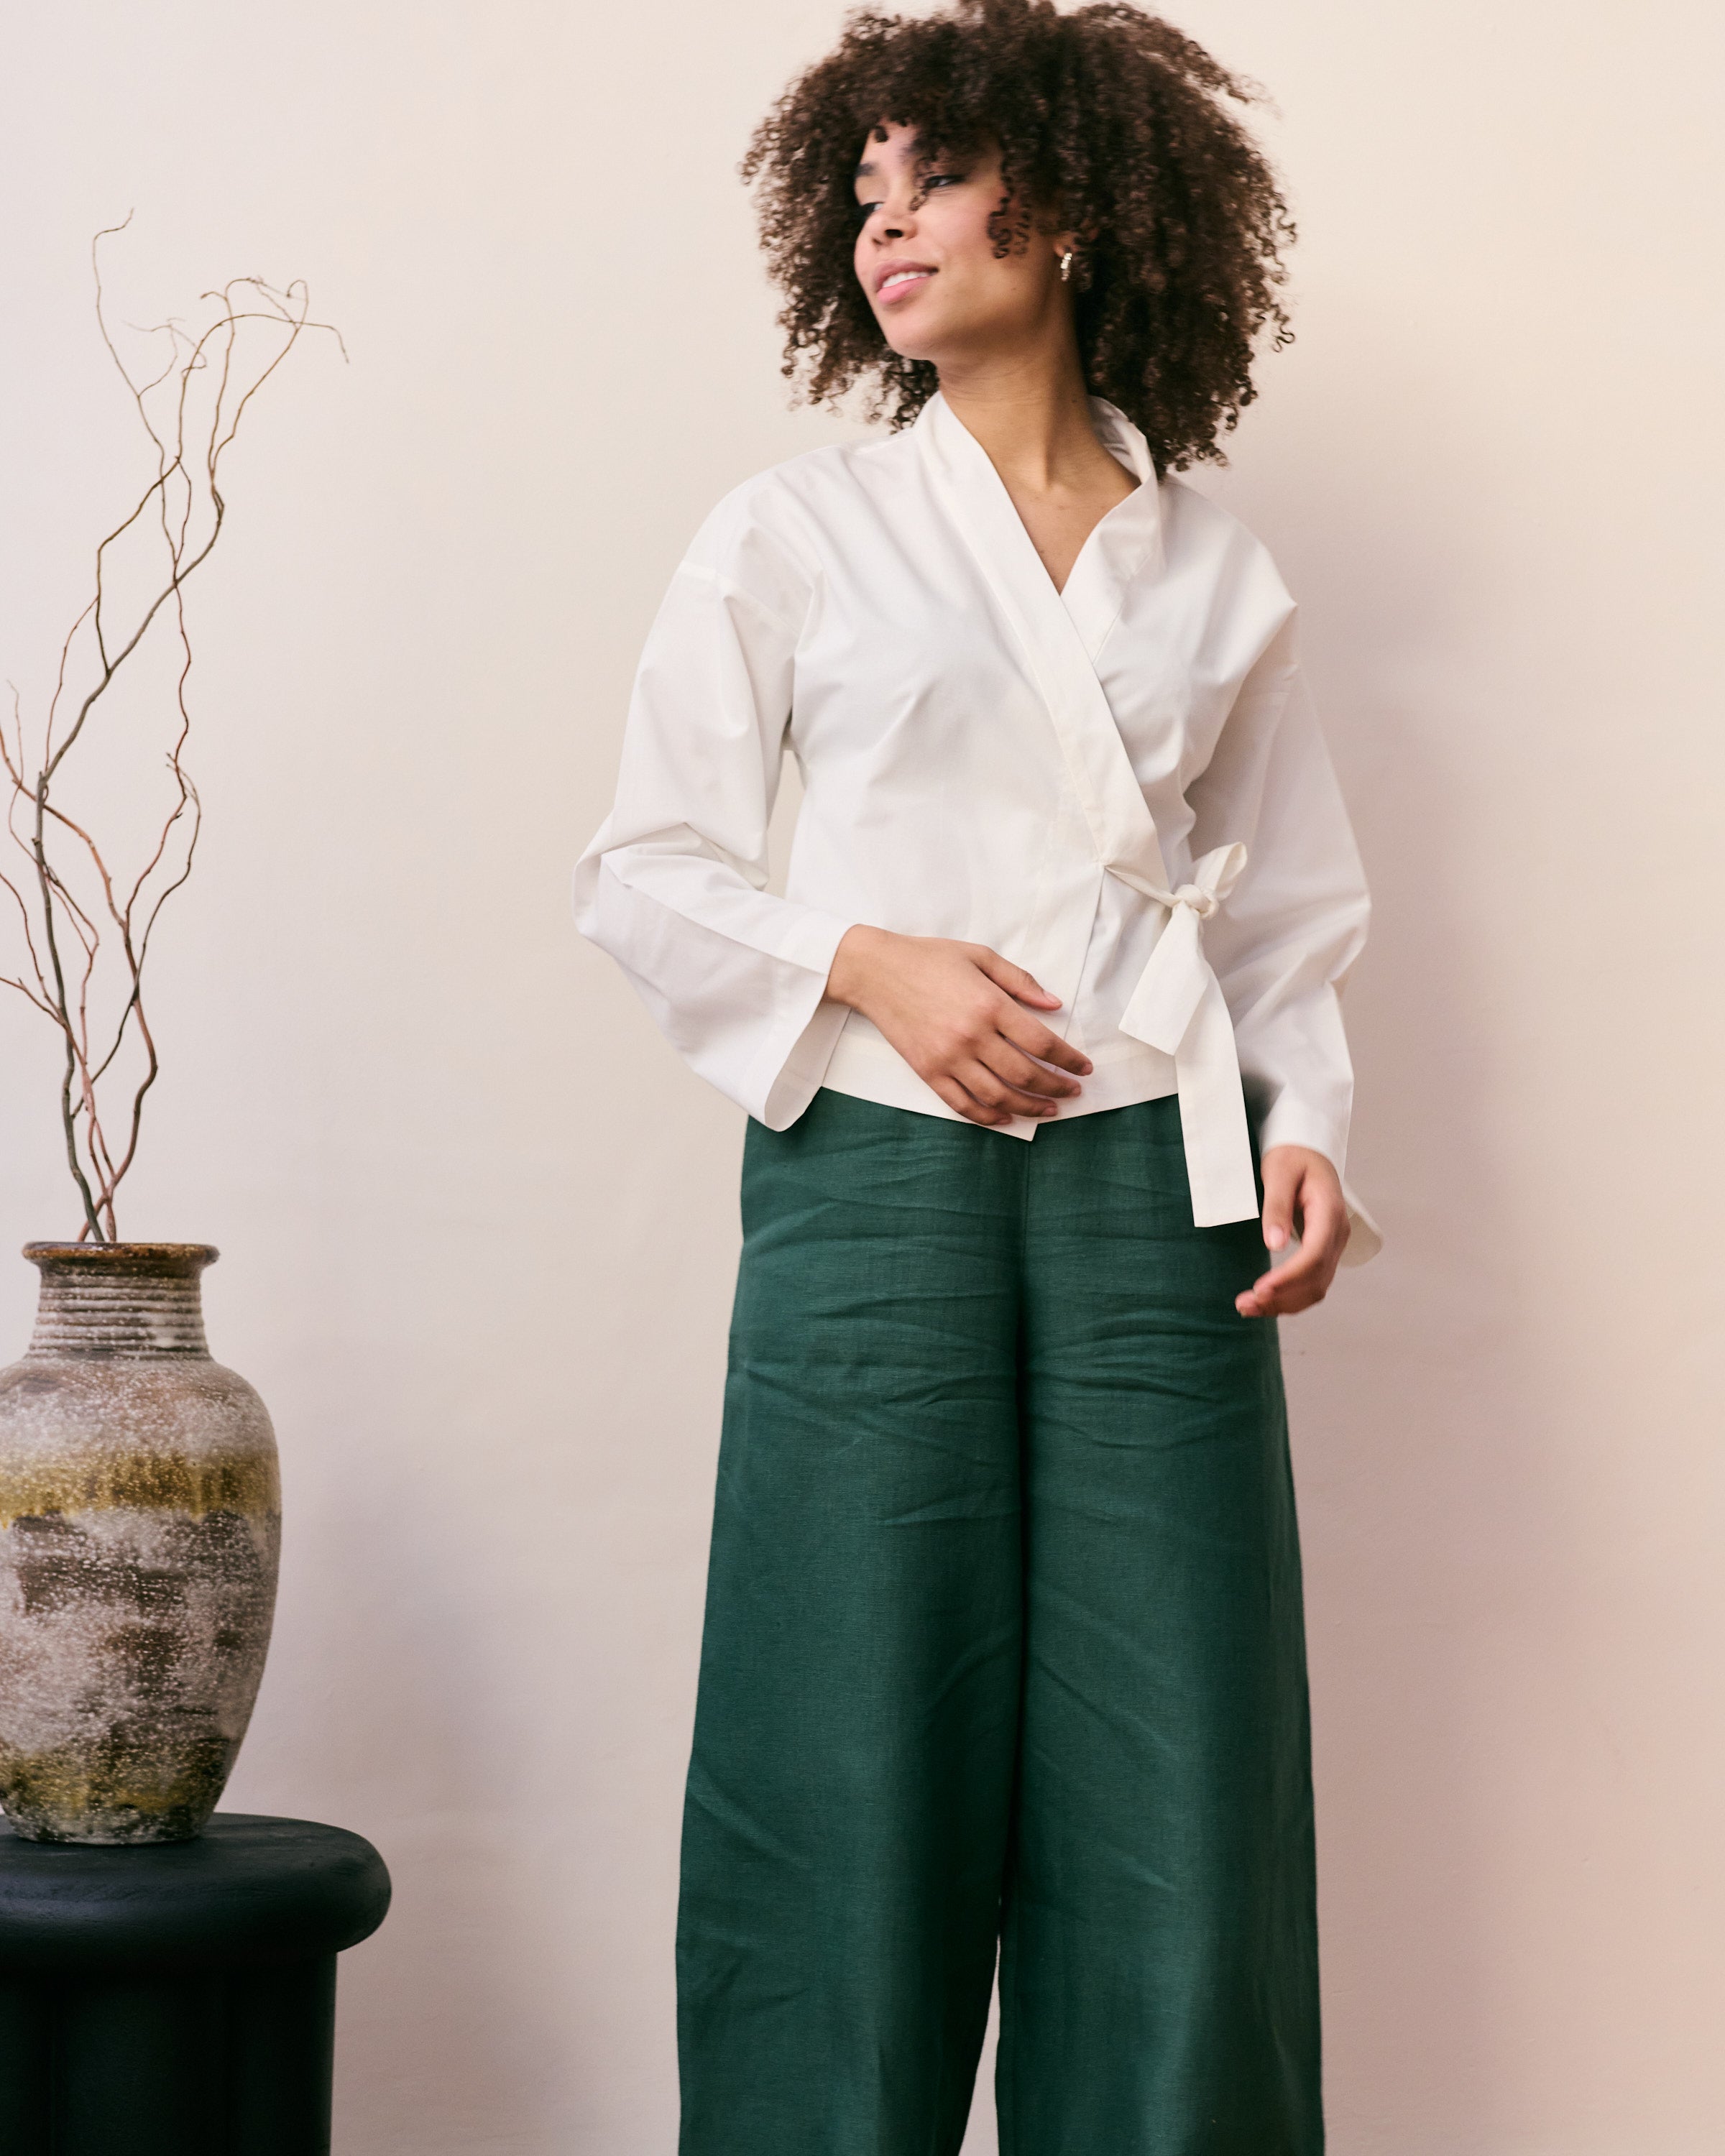 Comfortable green linen trousers and white cotton blouse.